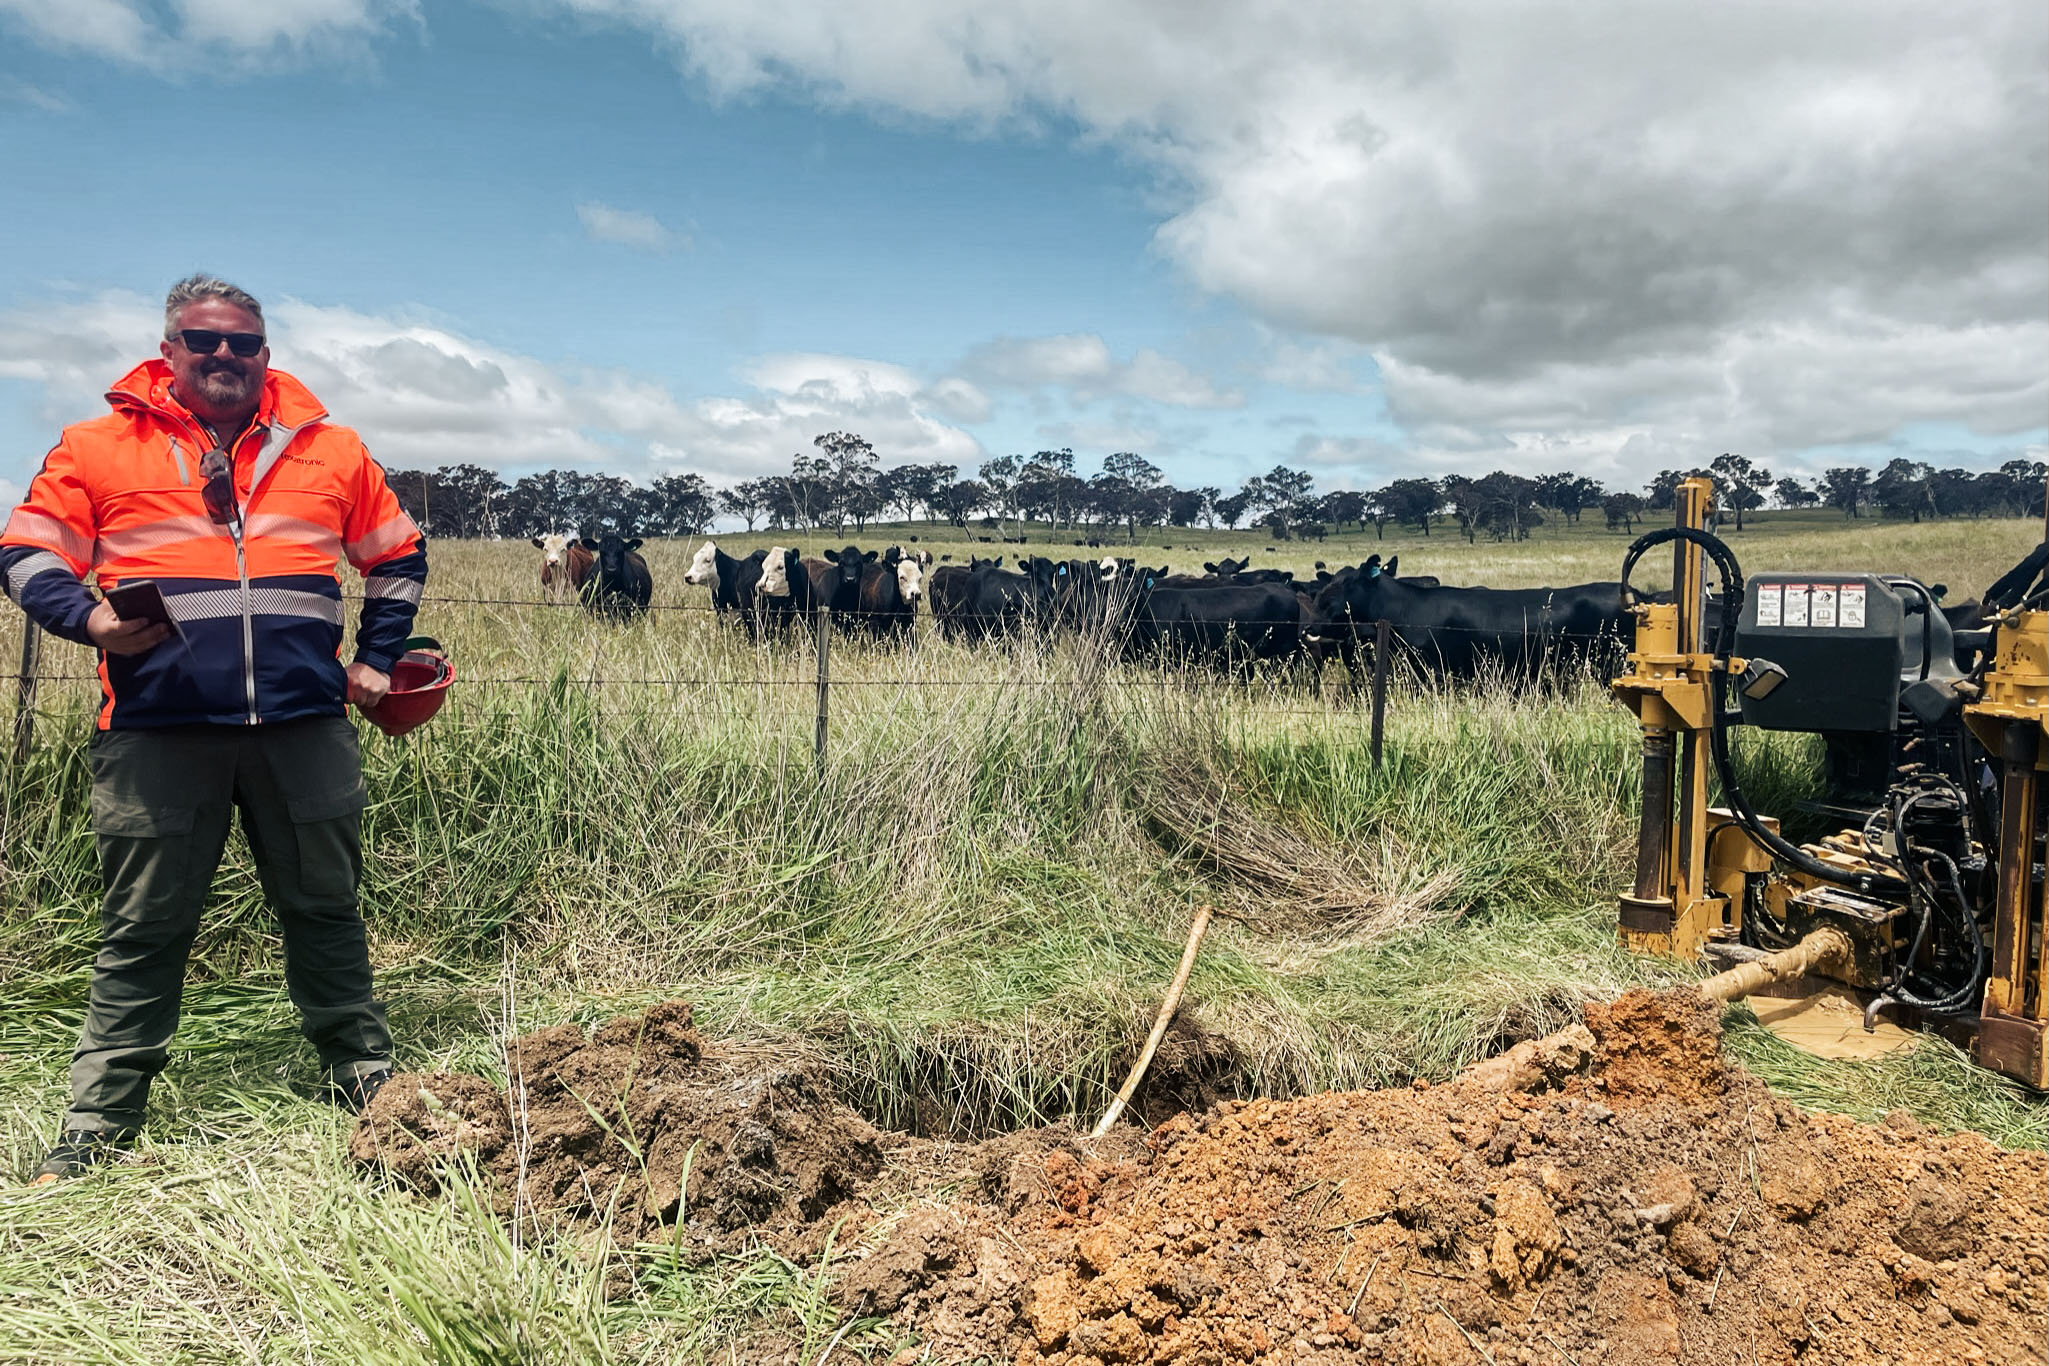 A worker in safety gear stands by machinery in a field. Cows graze under a cloudy sky in the distance.